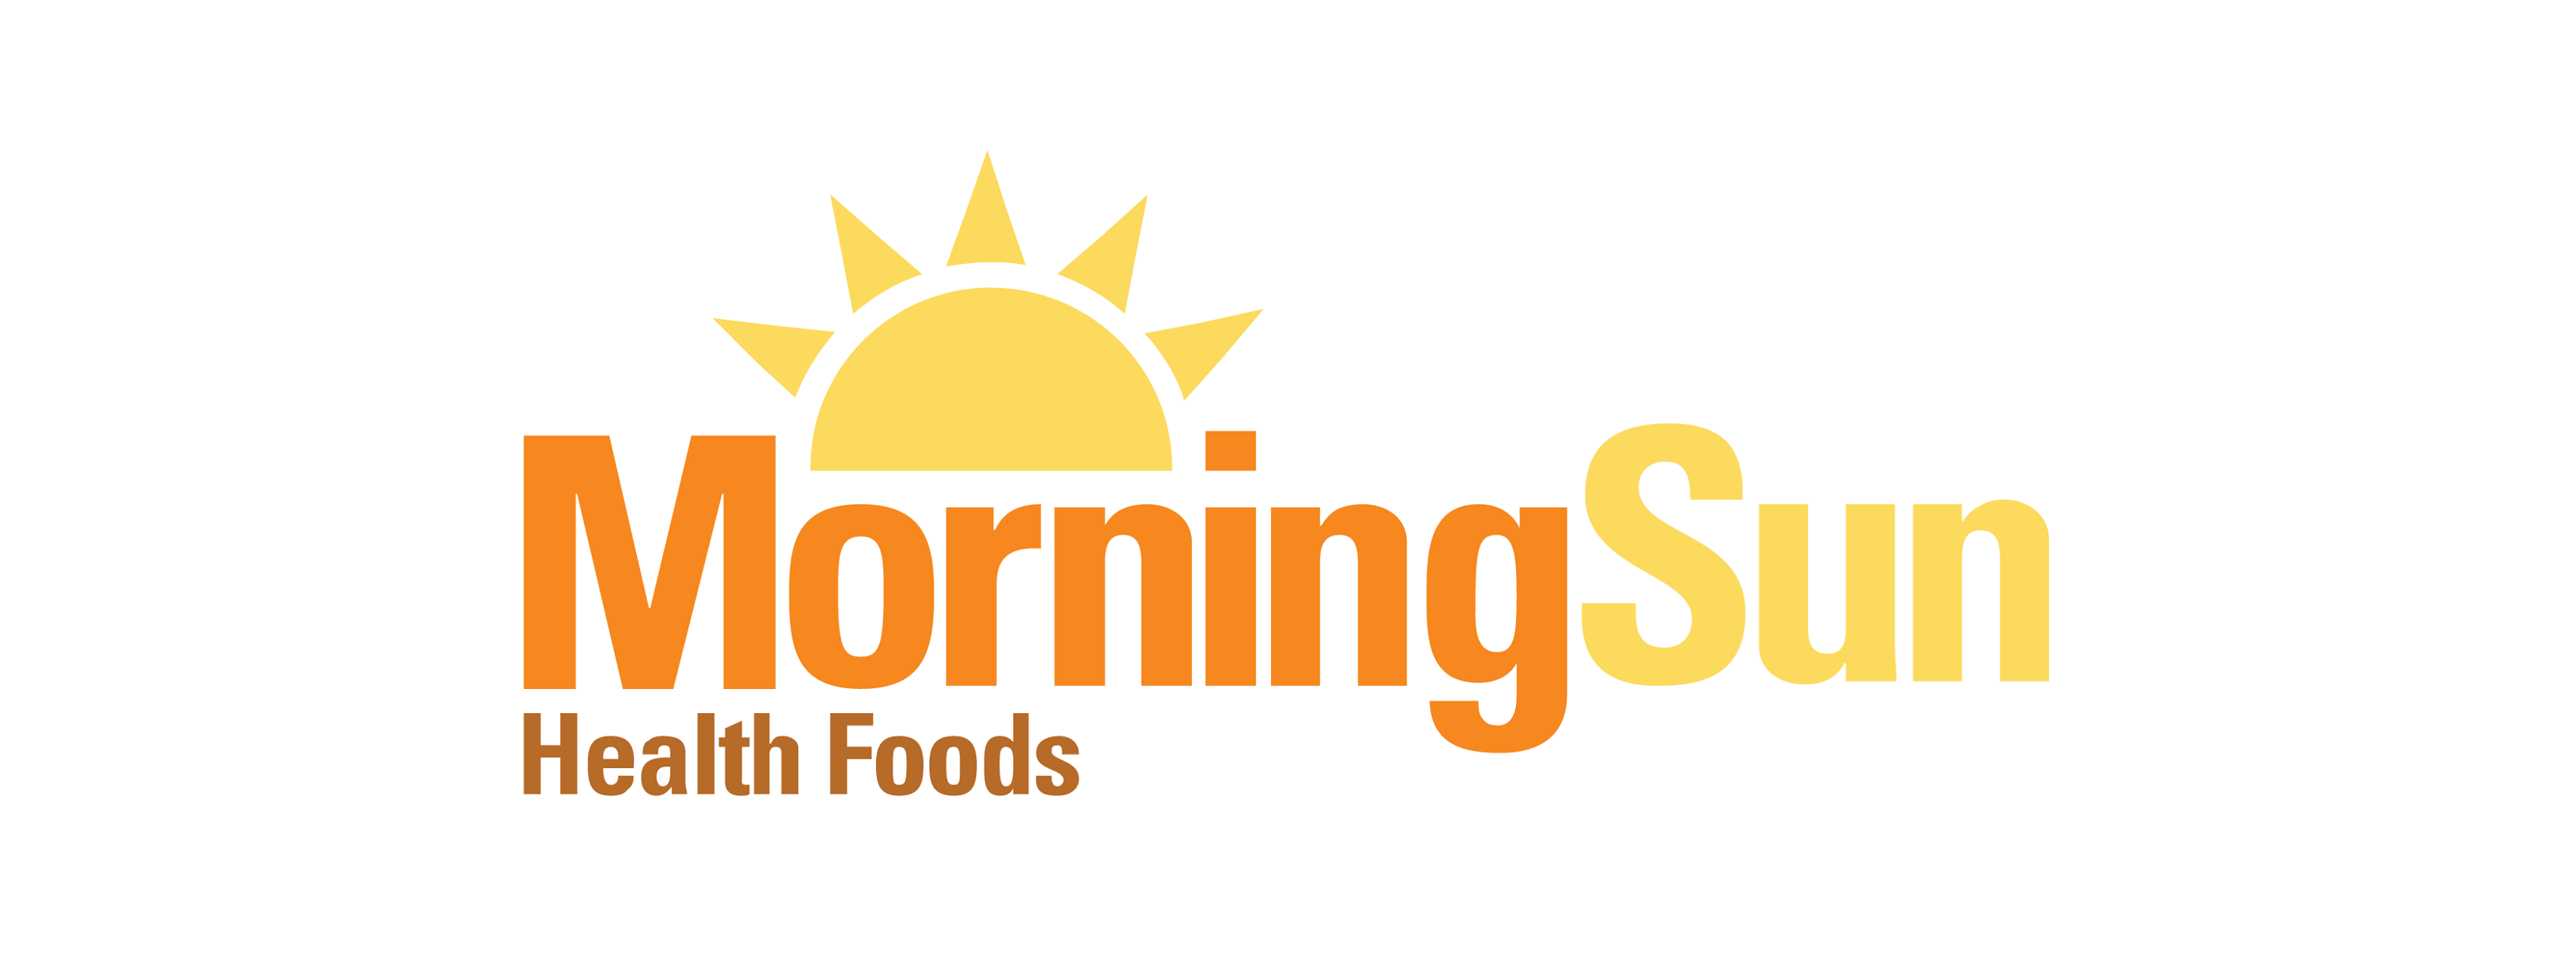 Morning Sun Health Foods - Food Stores